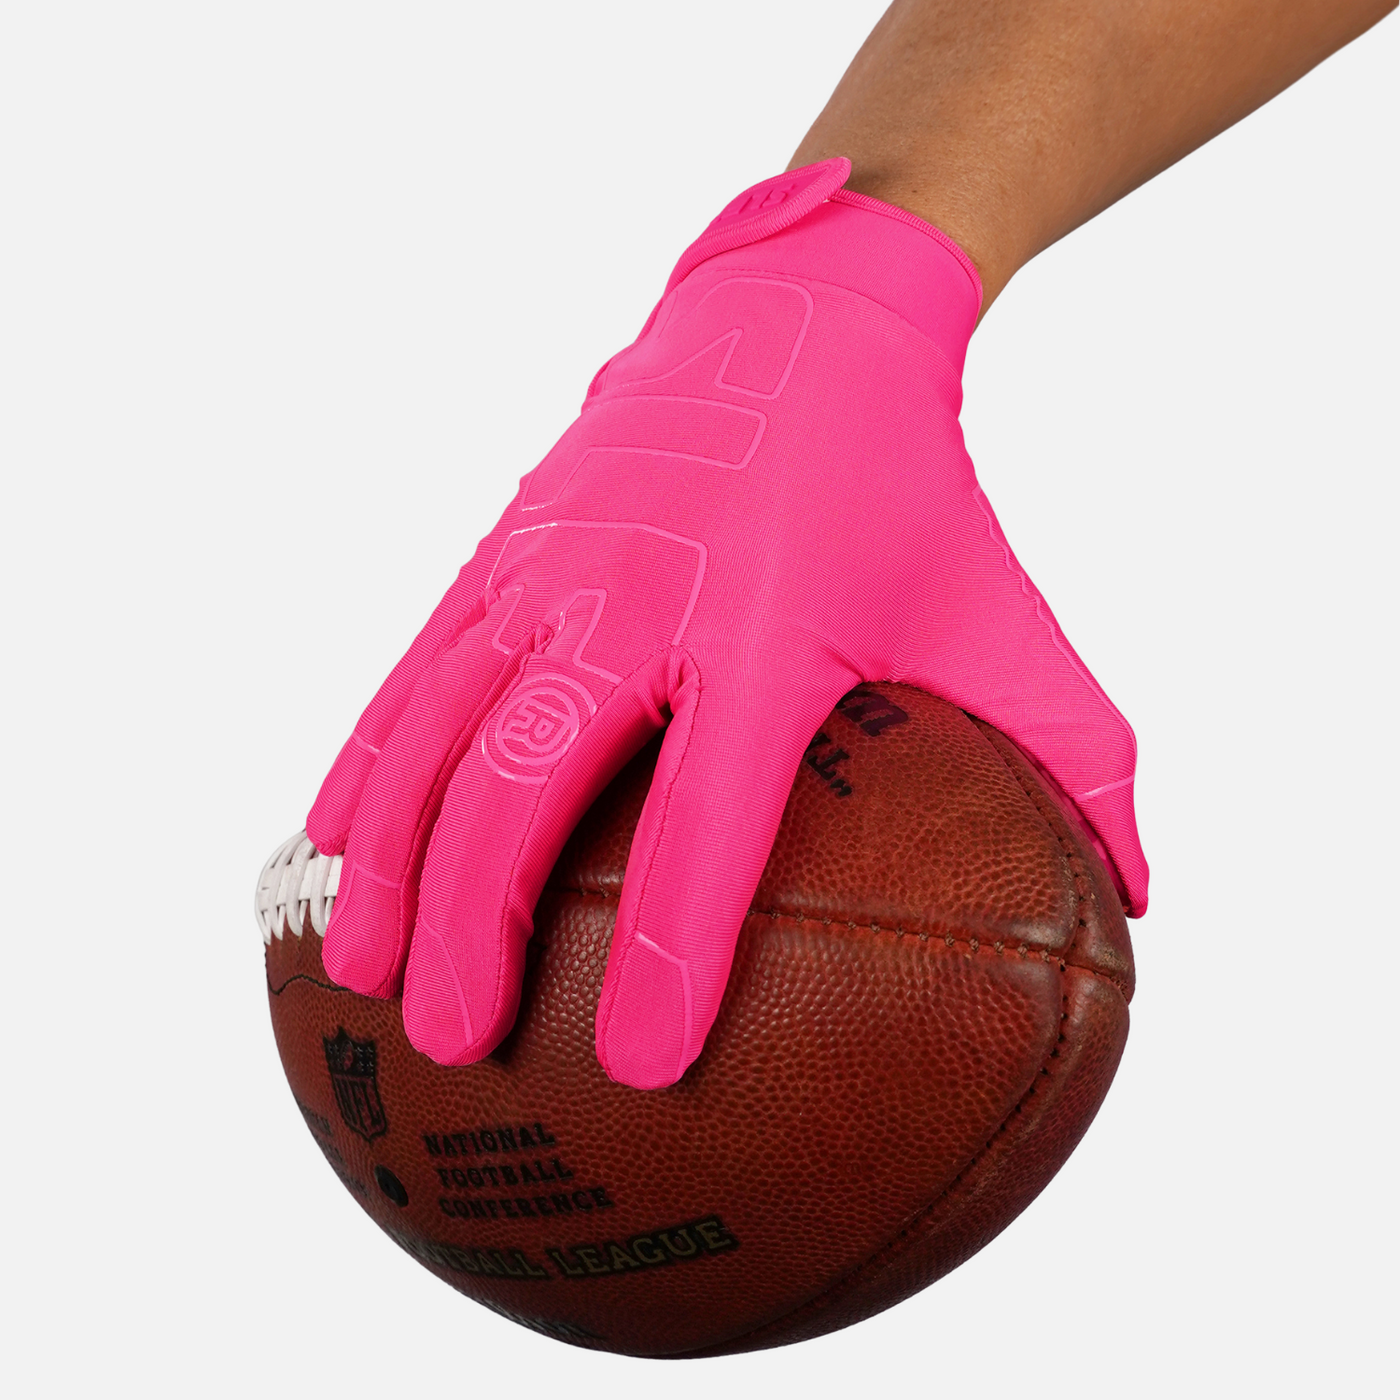 Neon Pink Sticky Football Receiver Gloves